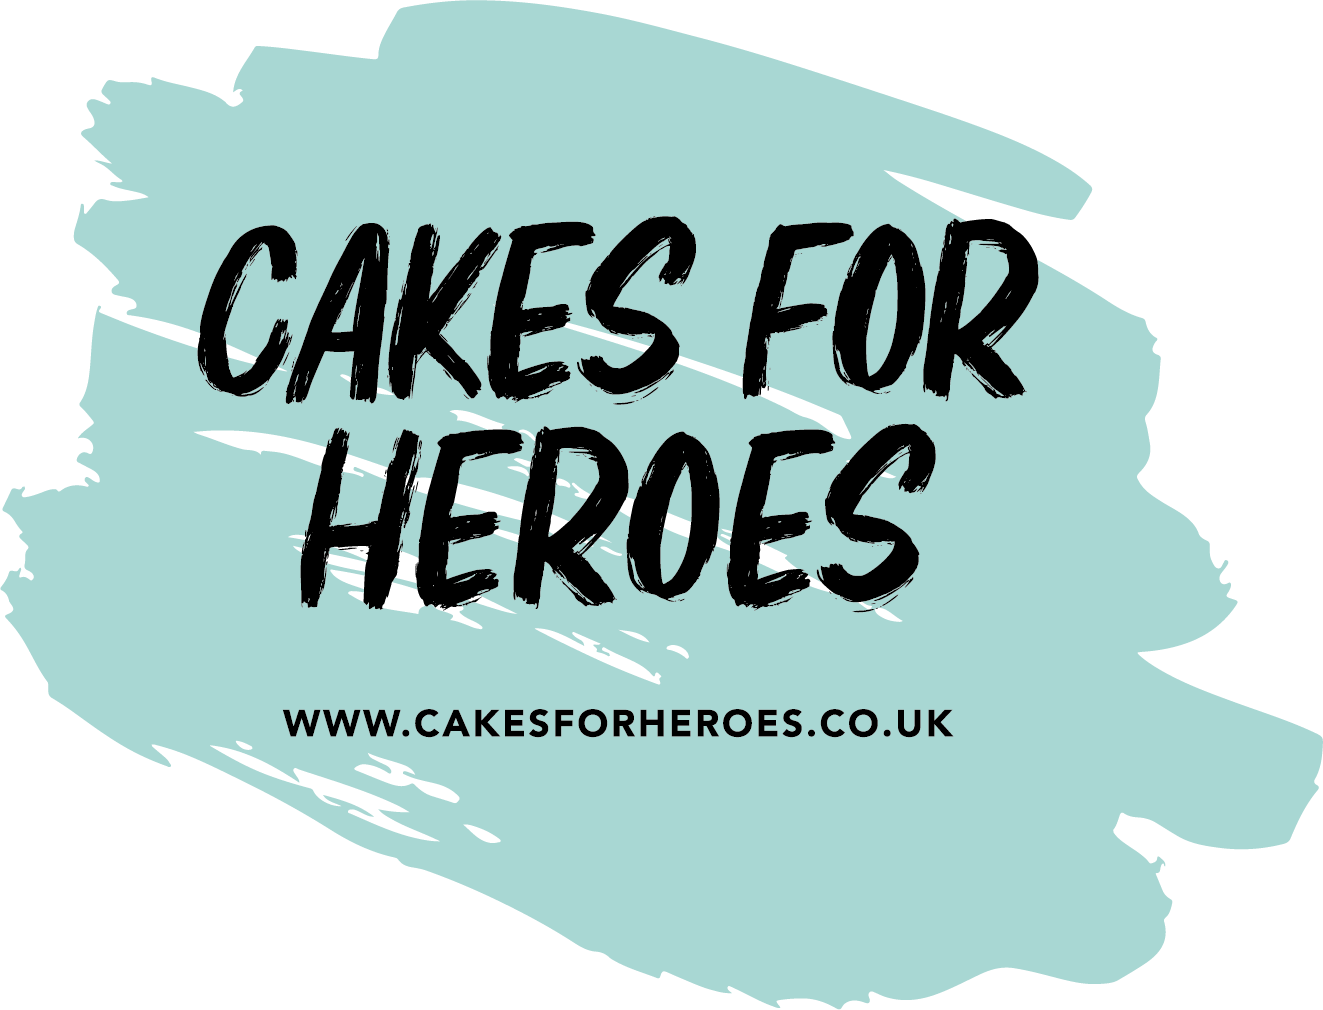 Cakes for Heroes